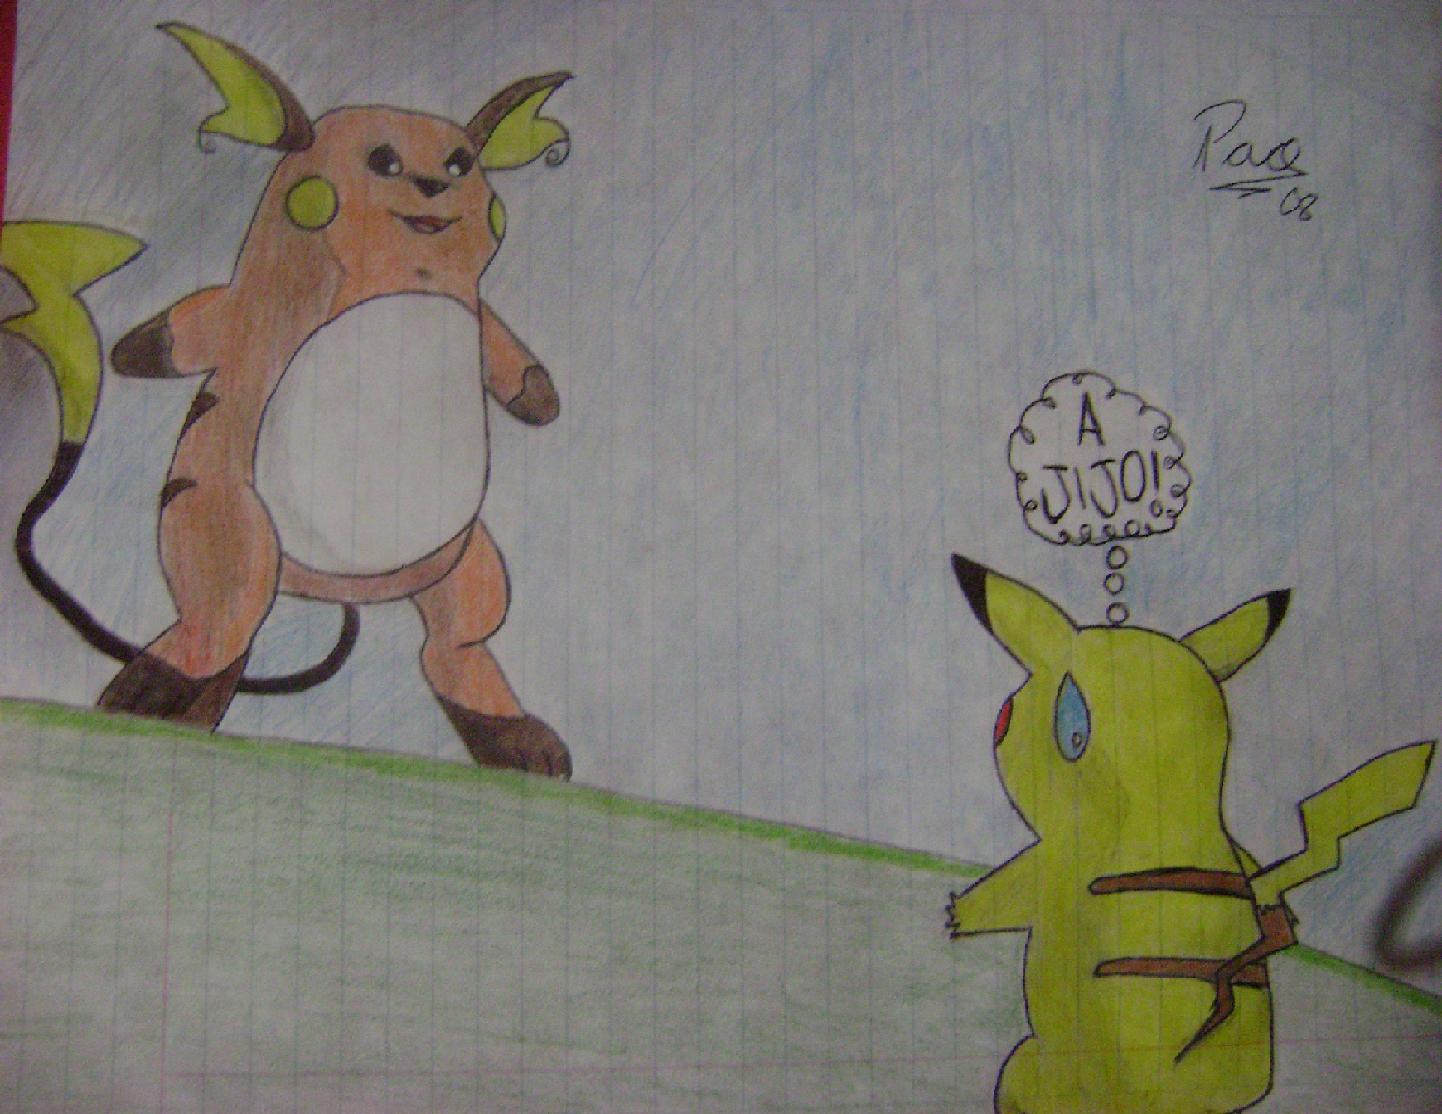 Pikachu "ready" to get pwned by Paola27